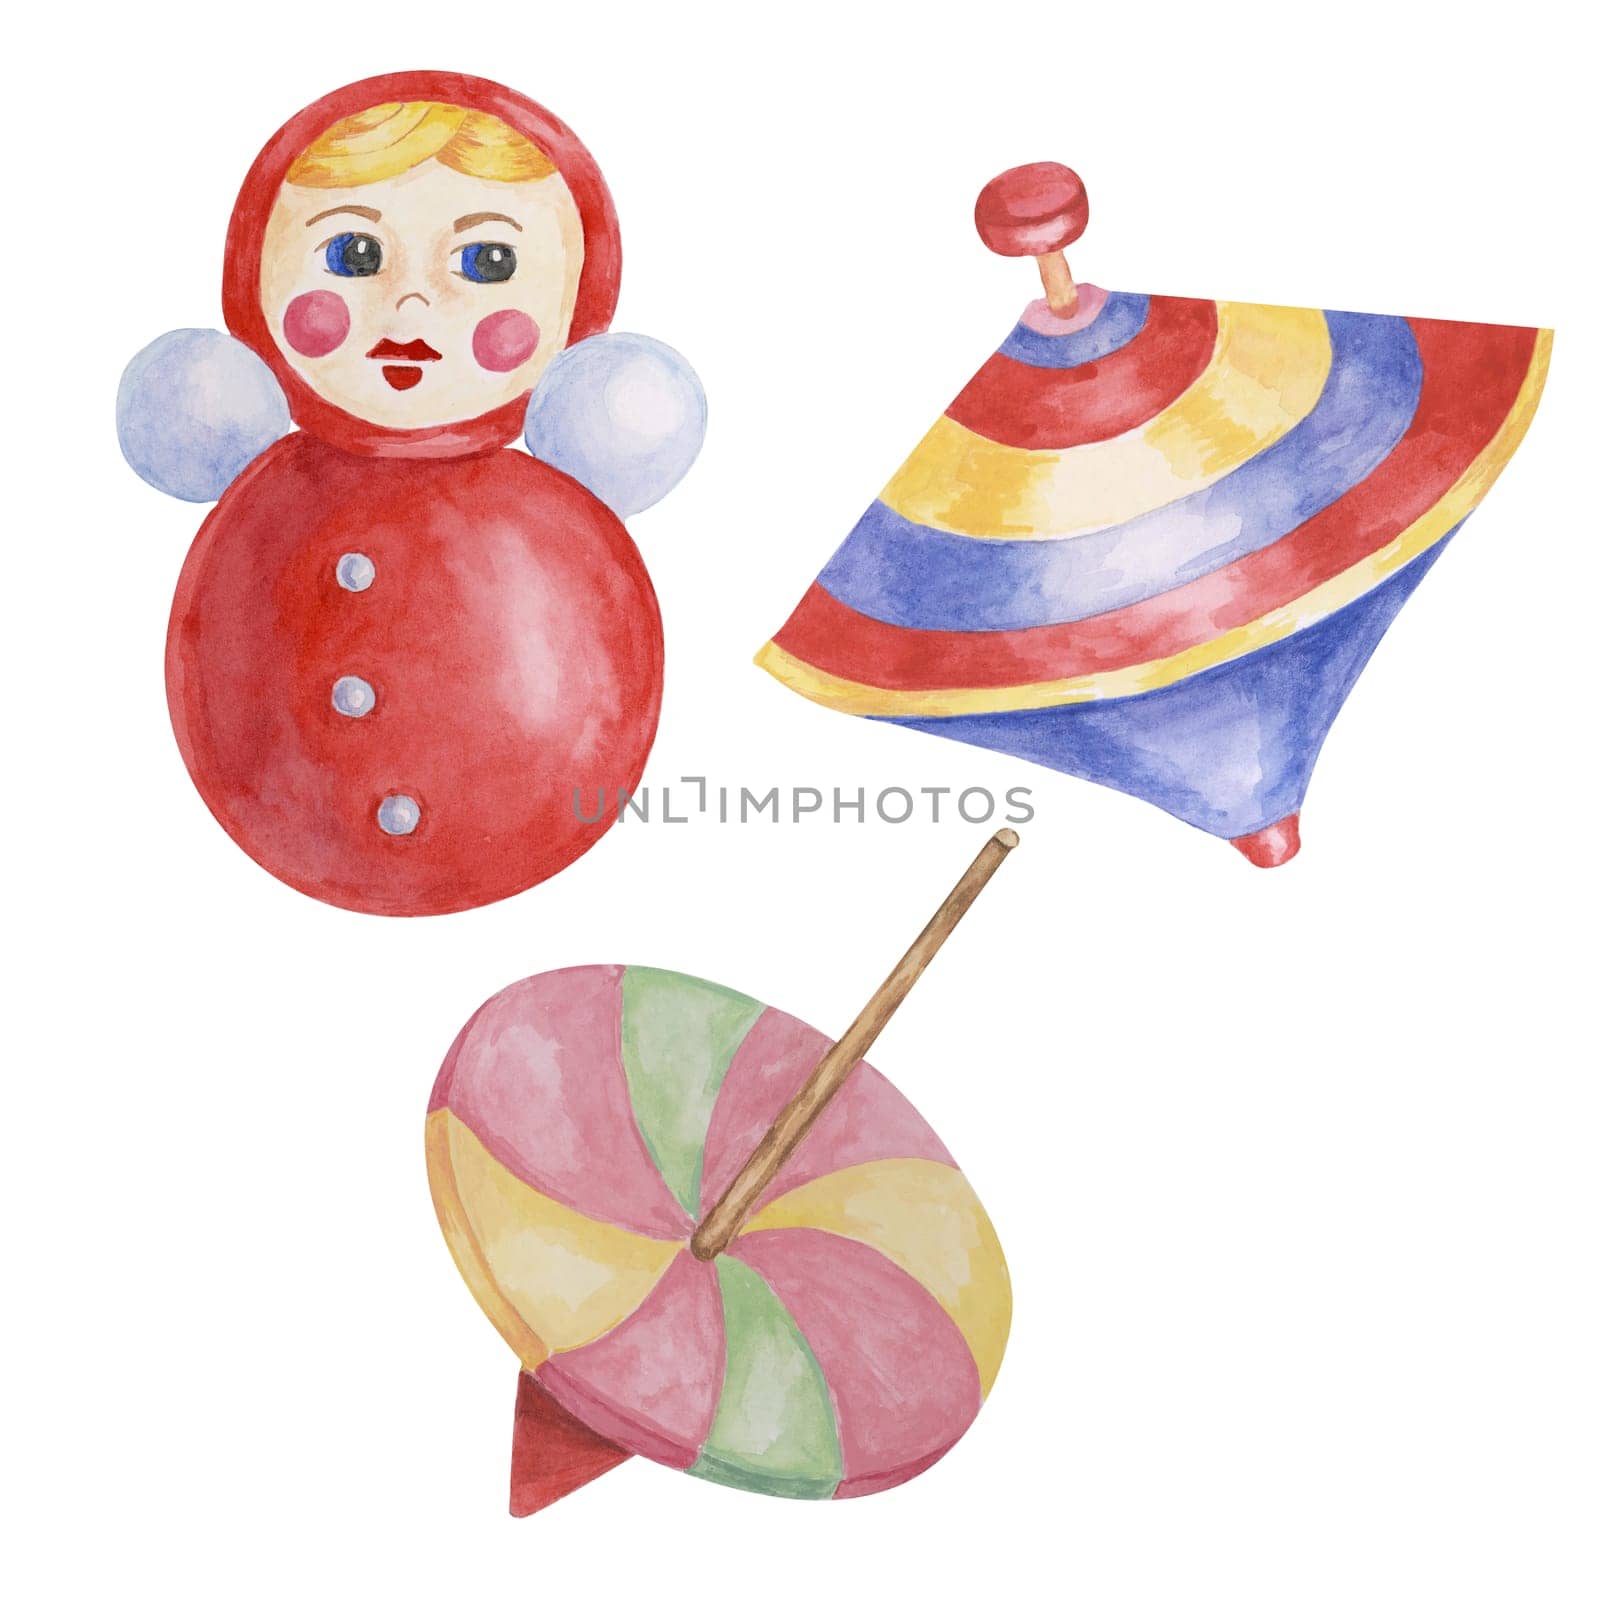 Whirligig toy, humming top and red roly poly tumbler doll. Retro play objects watercolor clipart for stickers, baby shower, invitation, birthday by Fofito